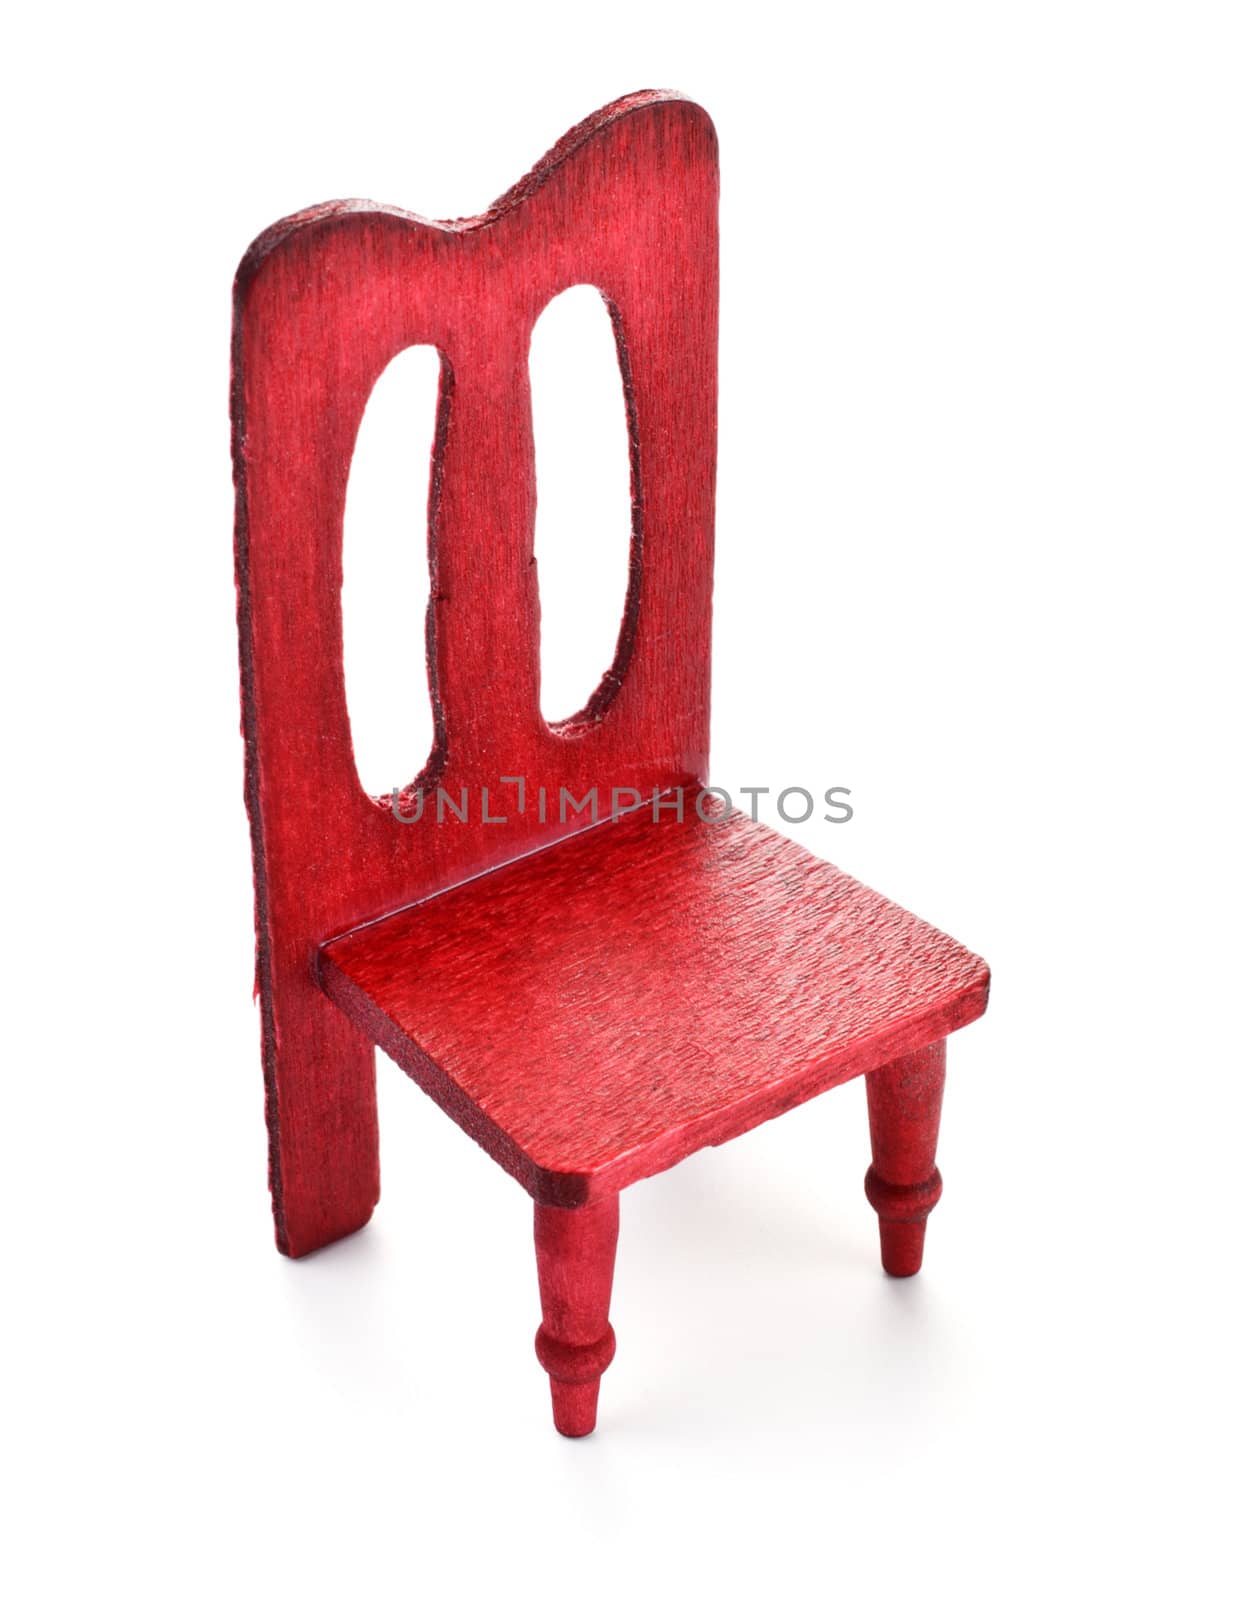 toy wooden chair isolated on white background